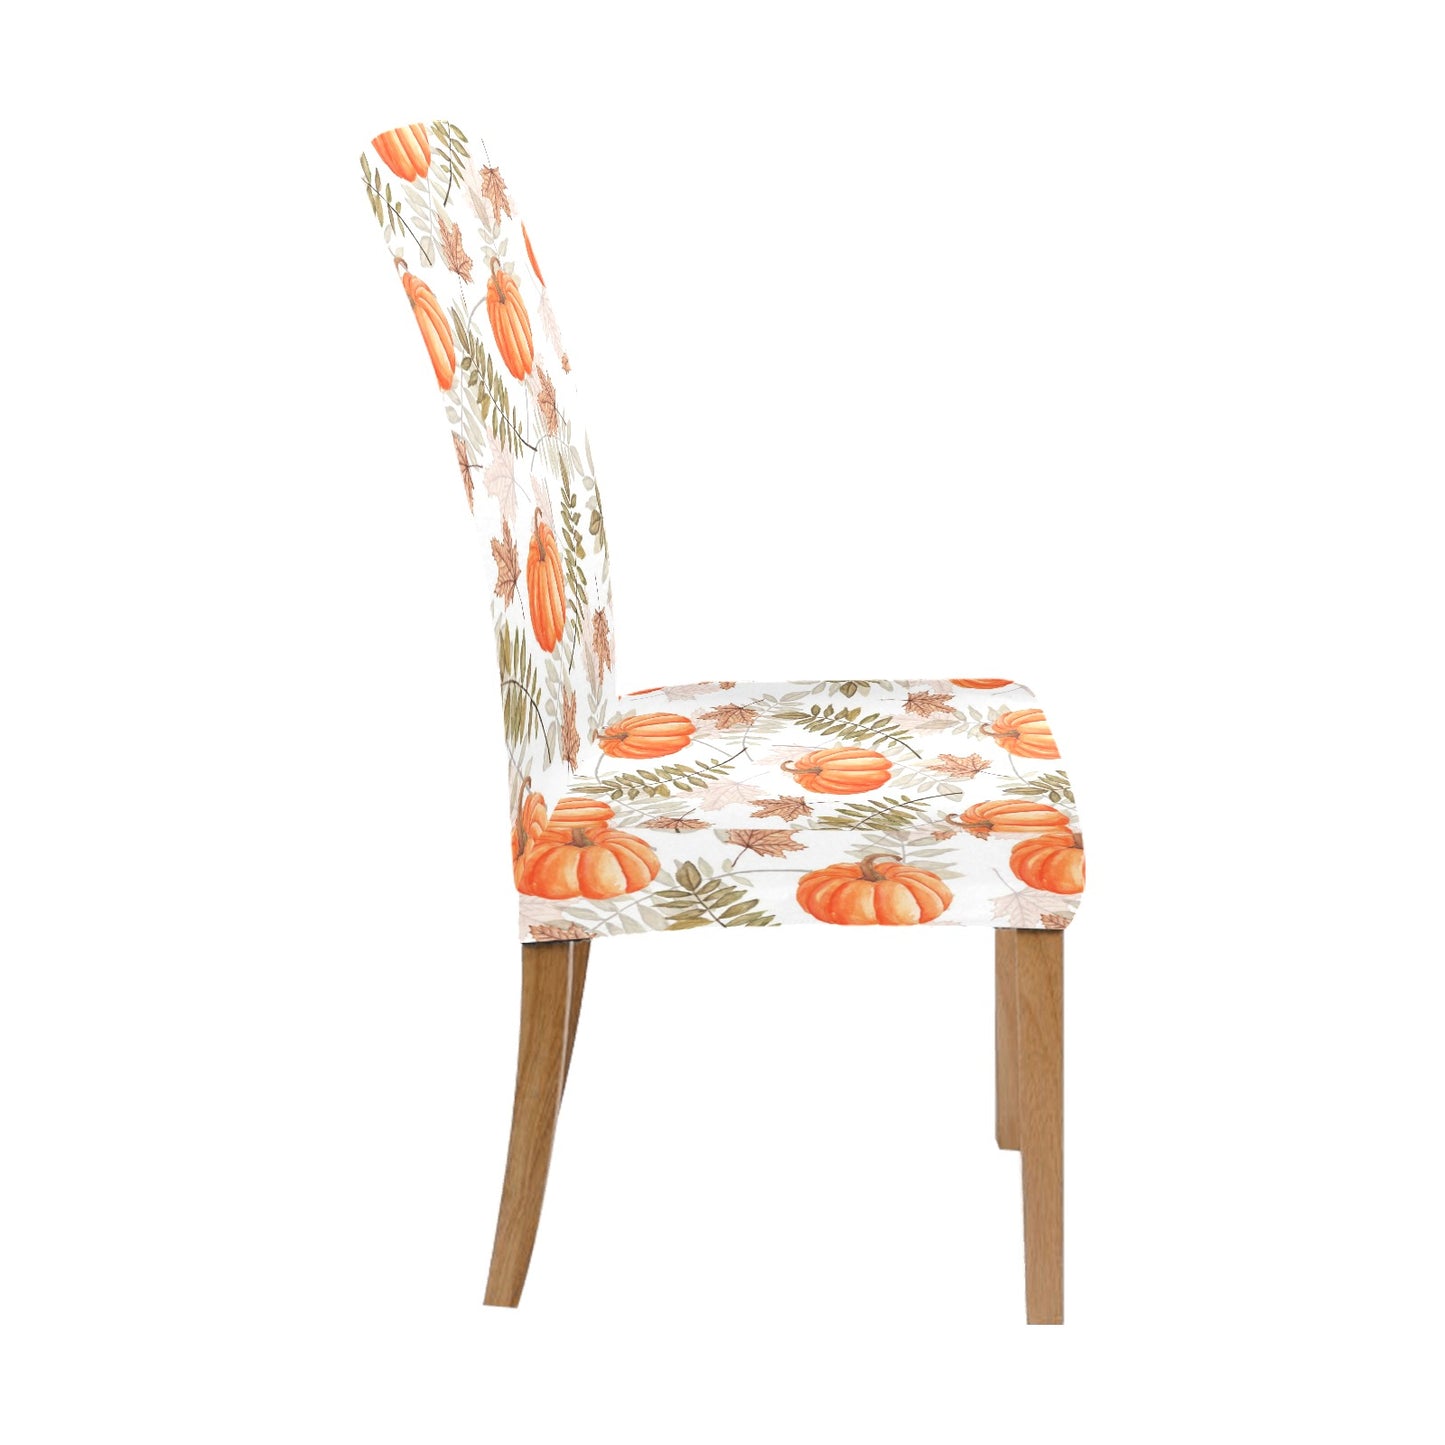 Pumpkins Dining Chair Seat Covers, Fall Autumn Halloween Thanksgiving Orange Stretch Slipcover Furniture Dining Living Room Decor Modern Starcove Fashion